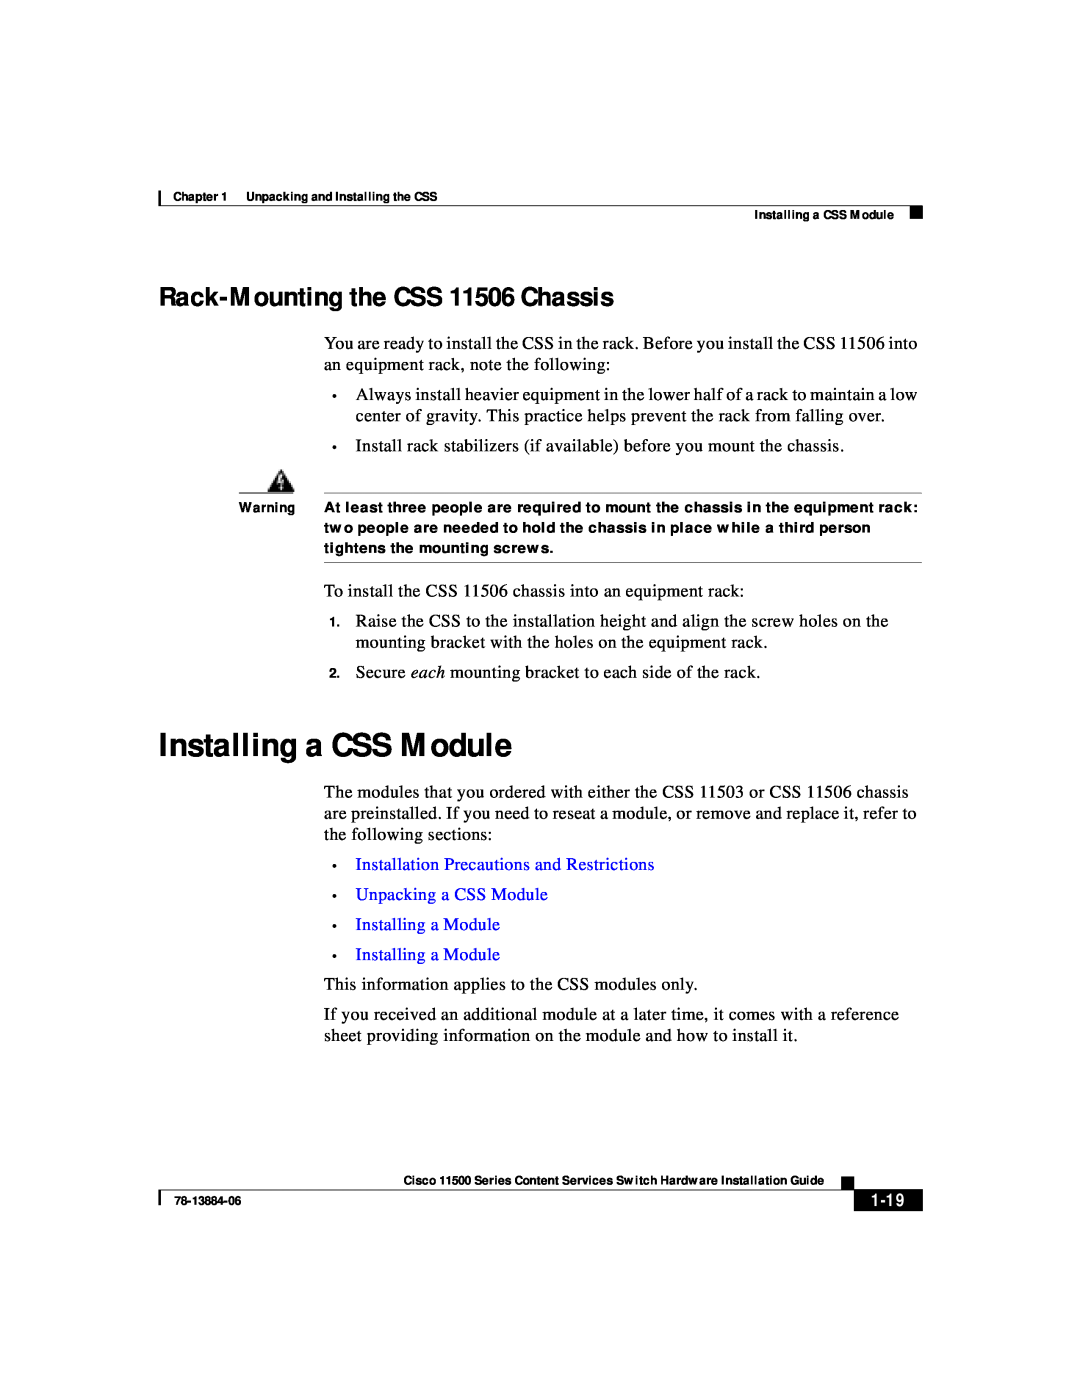 Cisco Systems 11500 Series manual Installing a CSS Module, Rack-Mounting the CSS 11506 Chassis, 1-19 